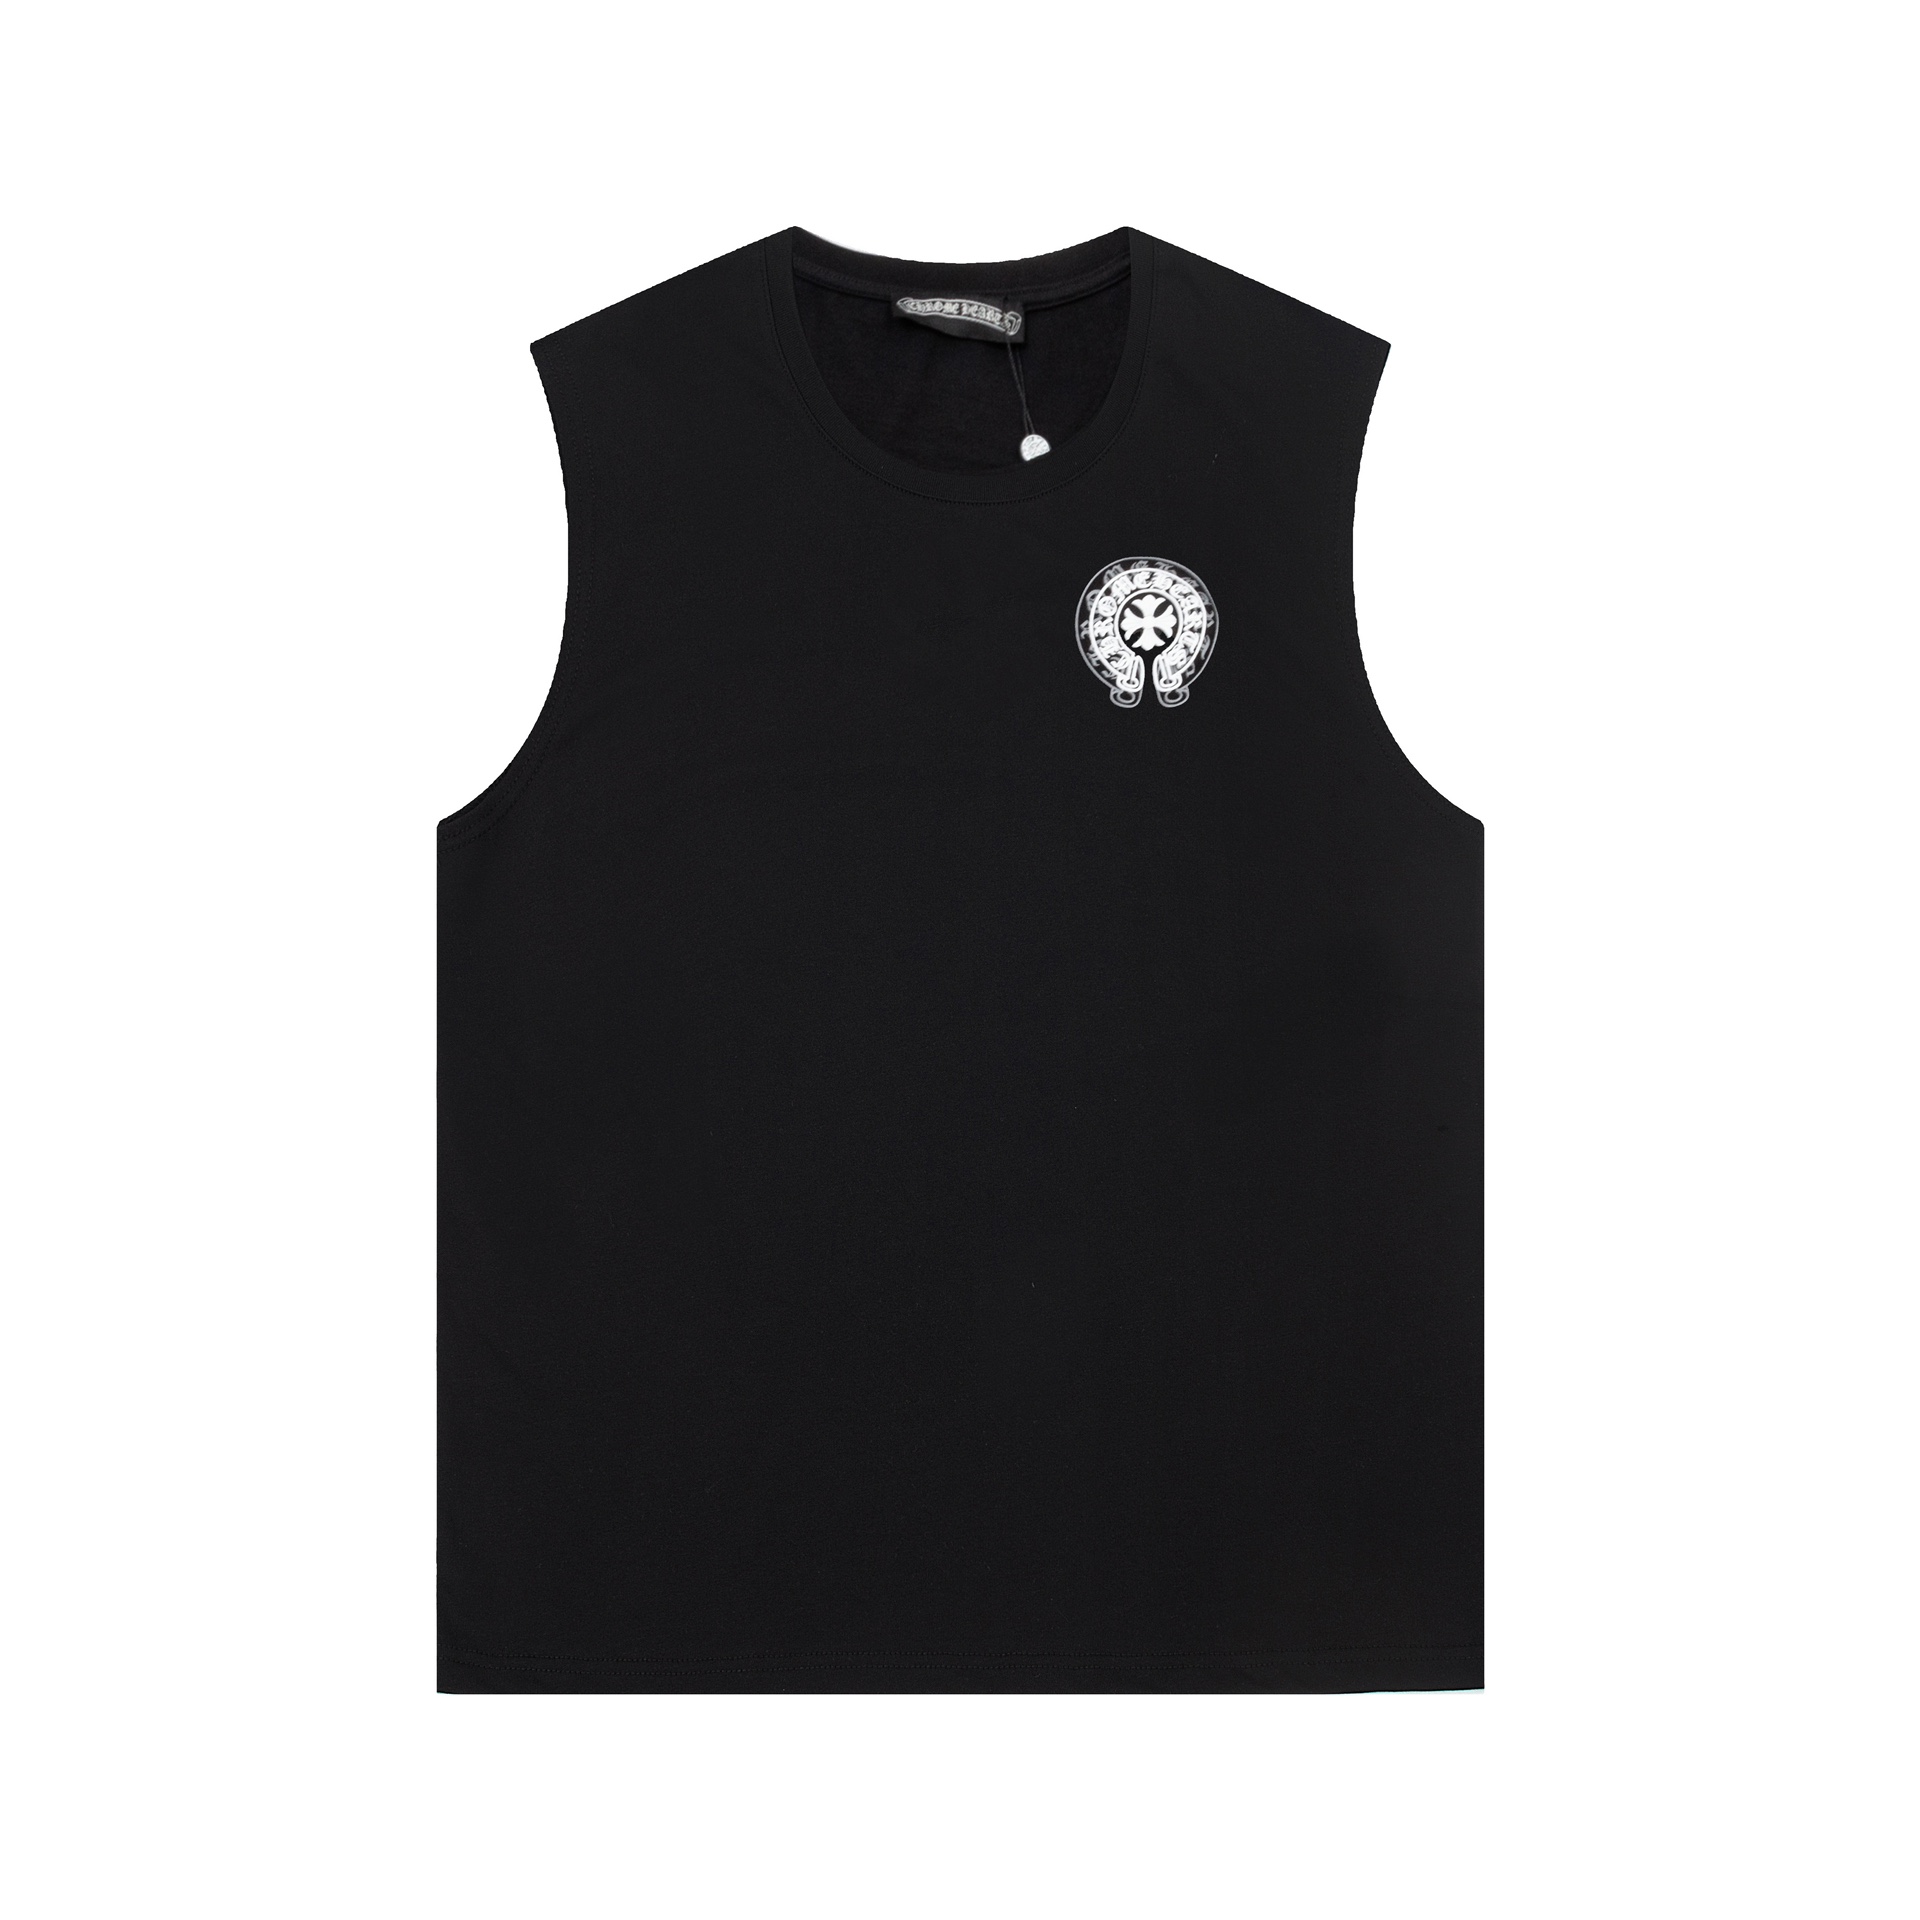 Chrome Hearts Clothing Tank Tops&Camis Waistcoats Black Printing Unisex Spring/Summer Collection Fashion